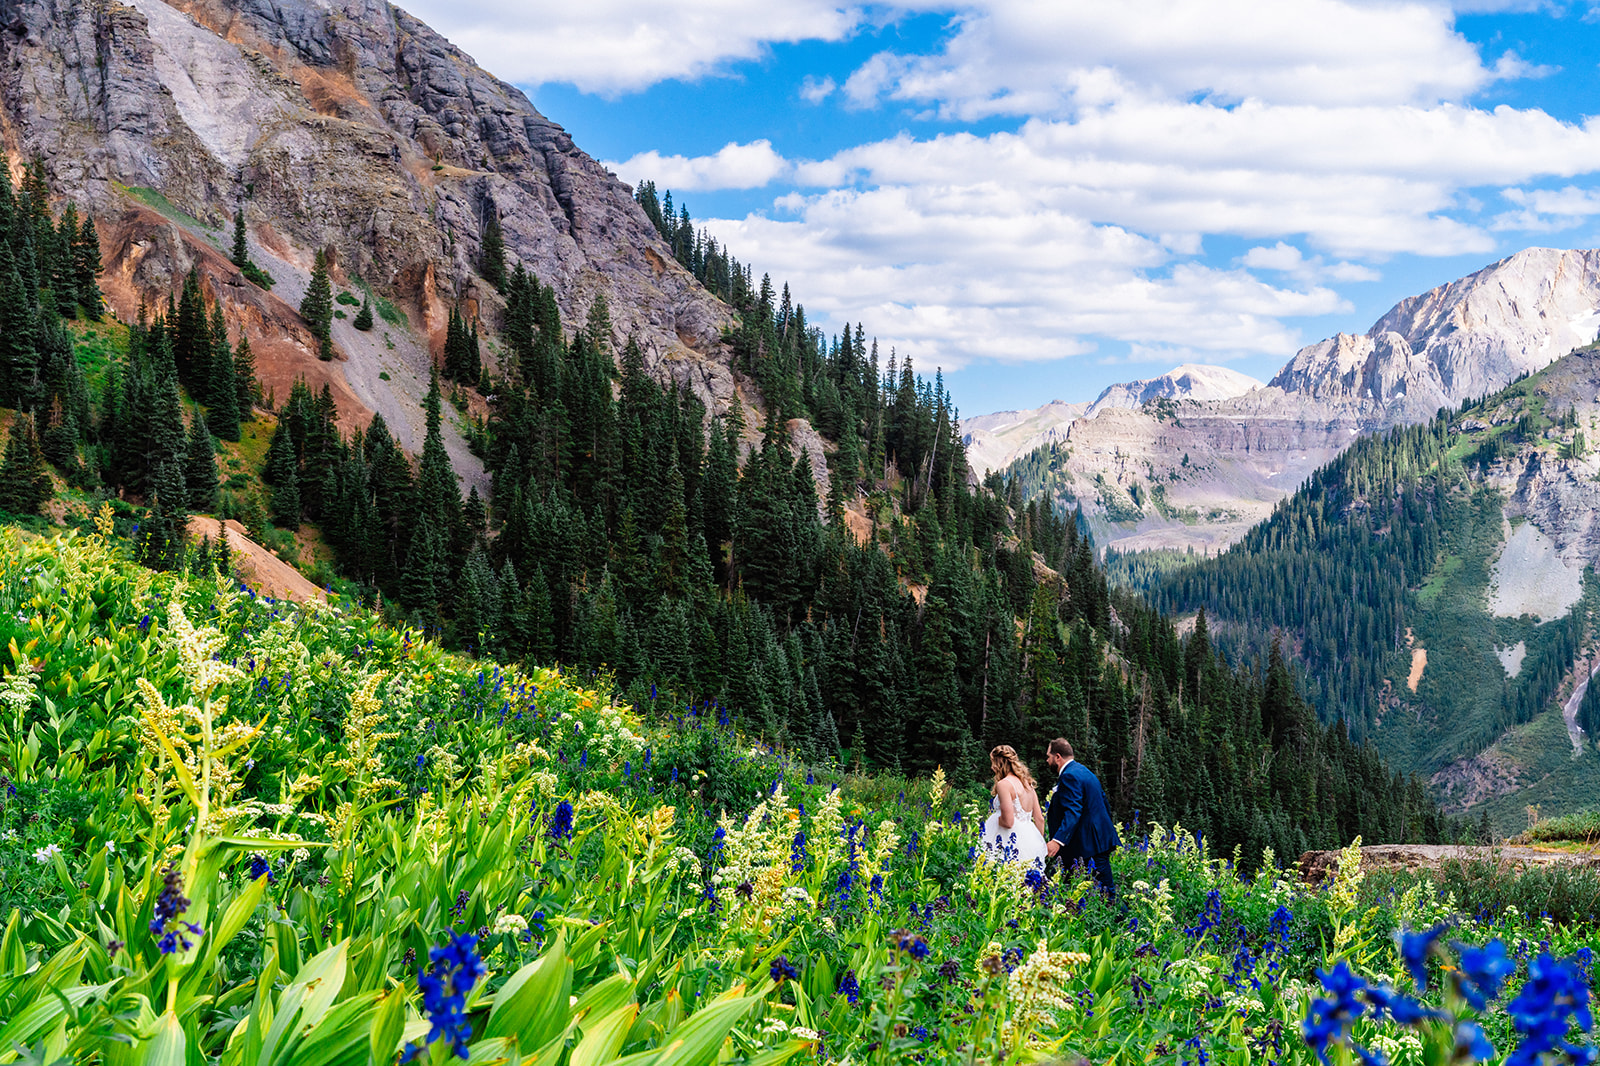 Bride and groom walking in a field of flowers and grass at Yankee Boy Basin